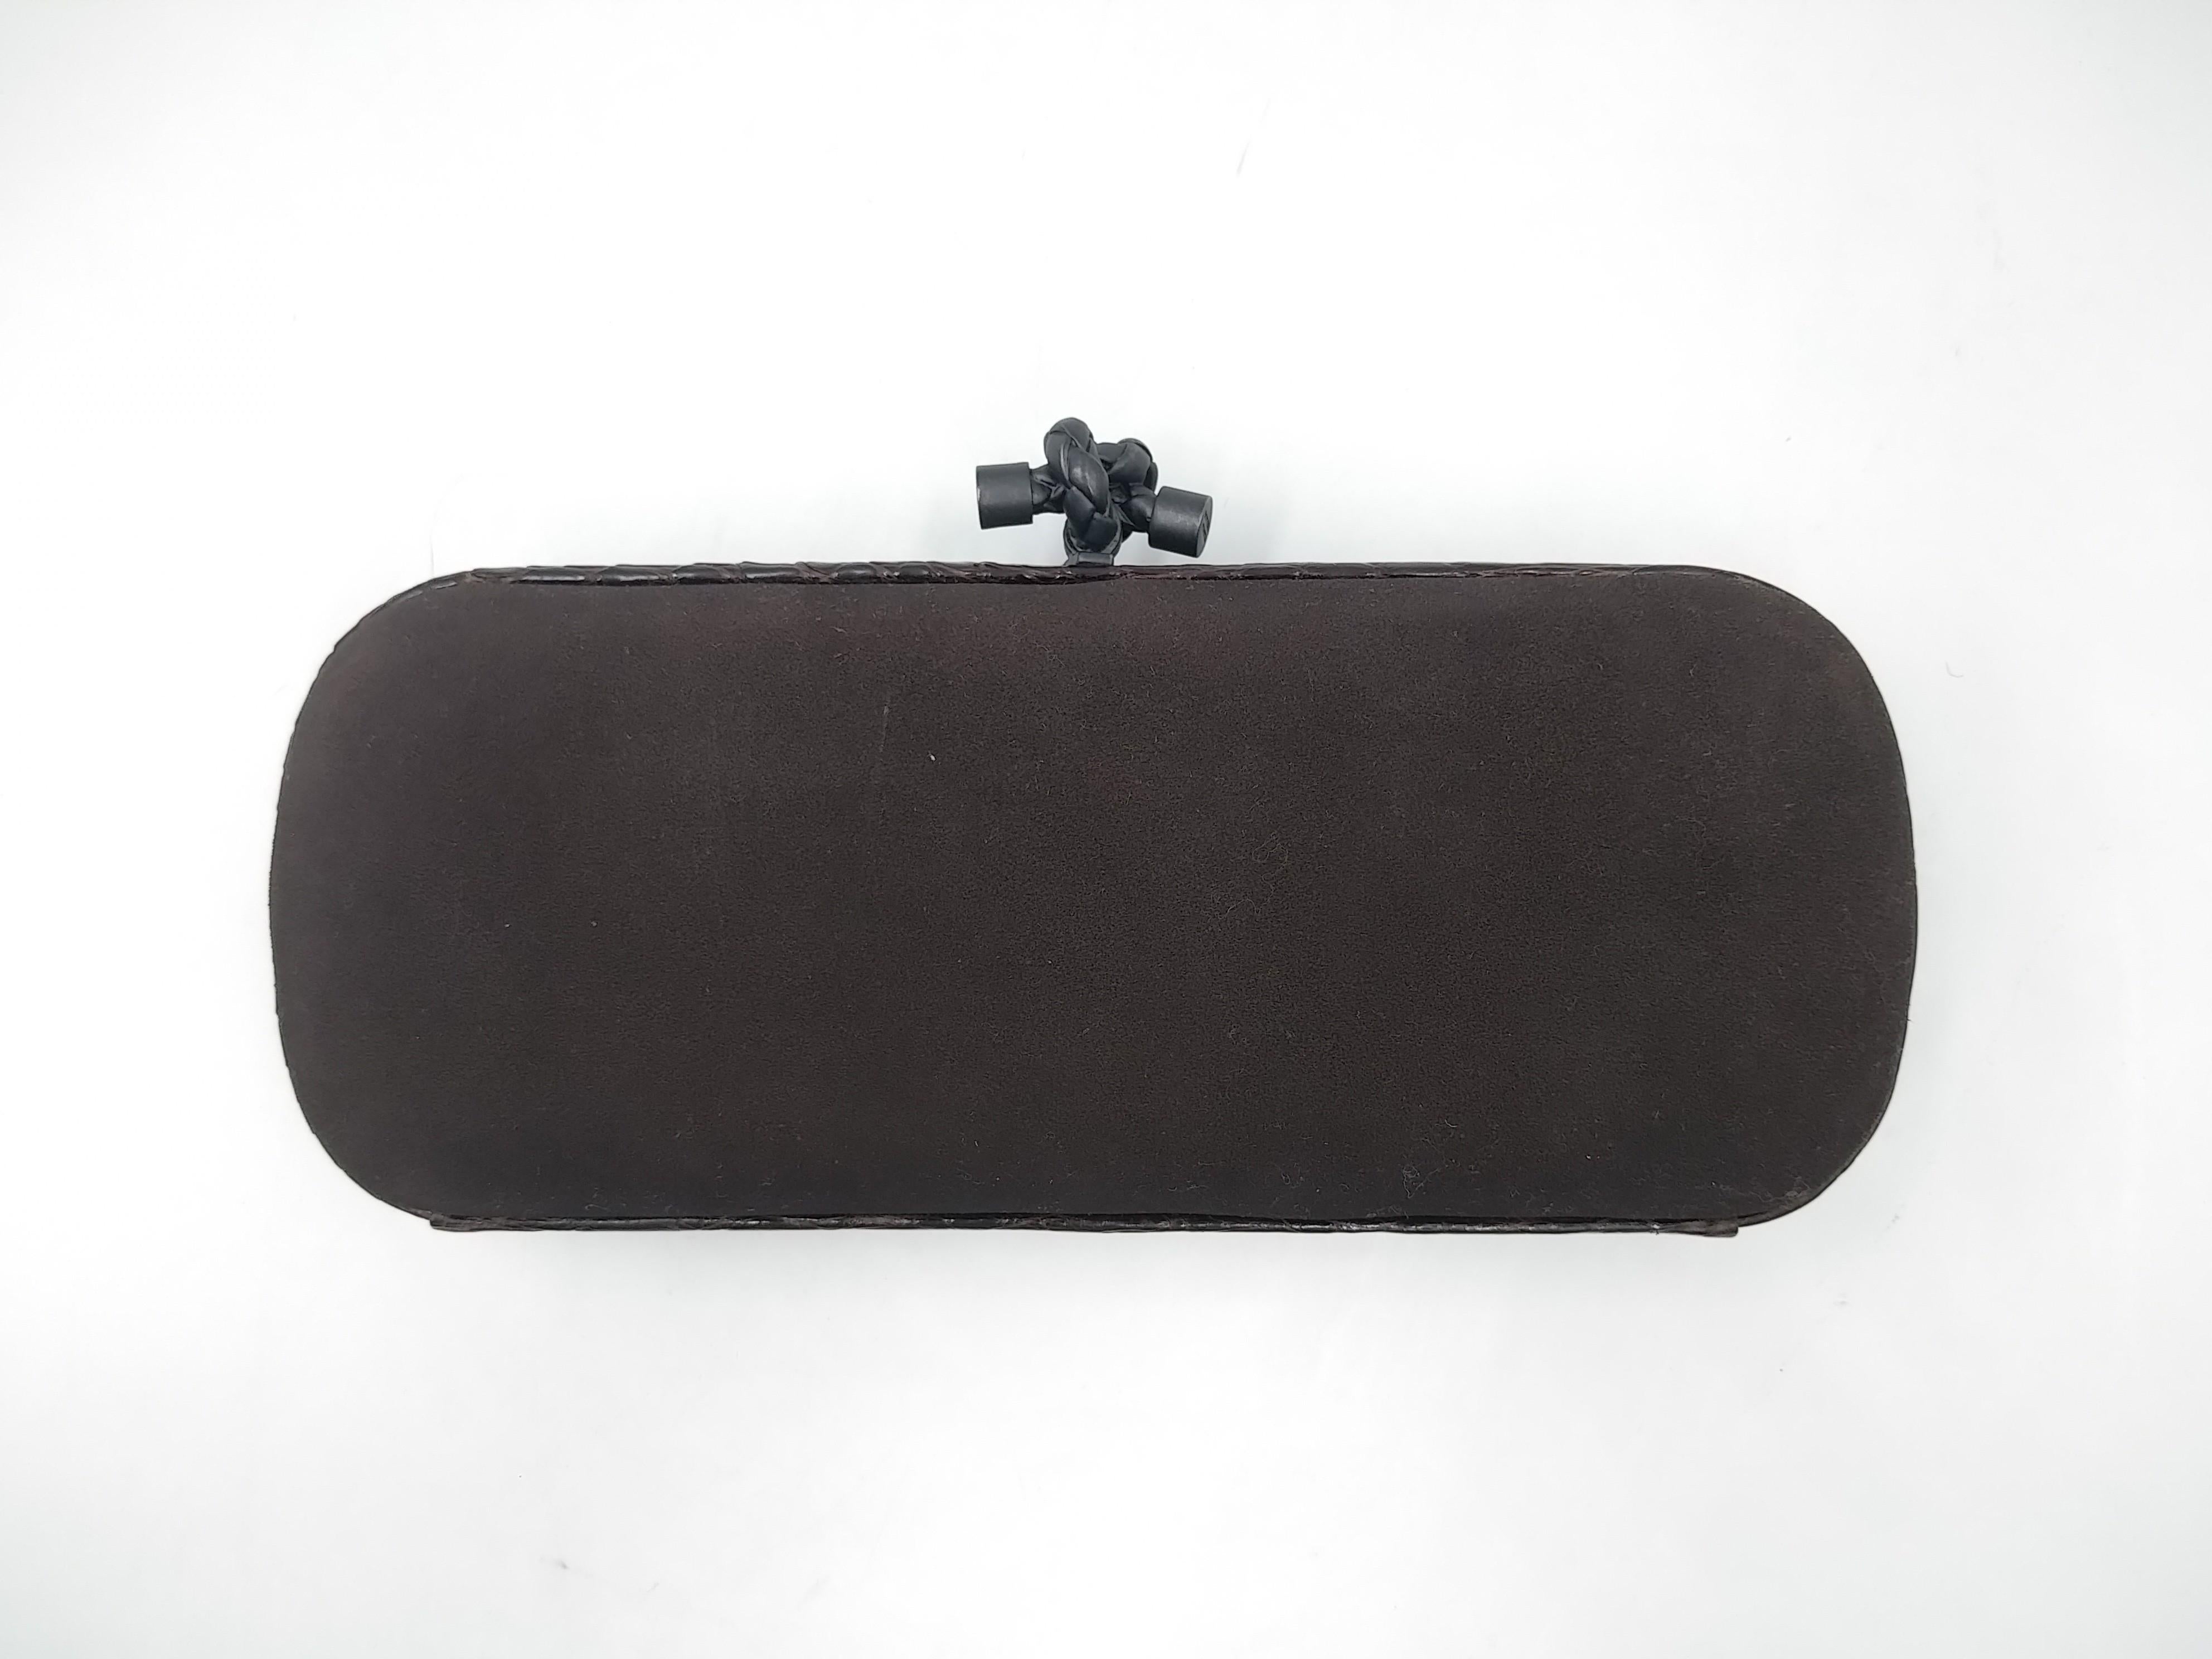 Bottega Veneta Brown Knot Clutch
- 100% Bottega Veneta
- brown velvet with crocodile trims
- Frame top with knot clasp
- brown suede inside
- box, dust bag and item tag included

